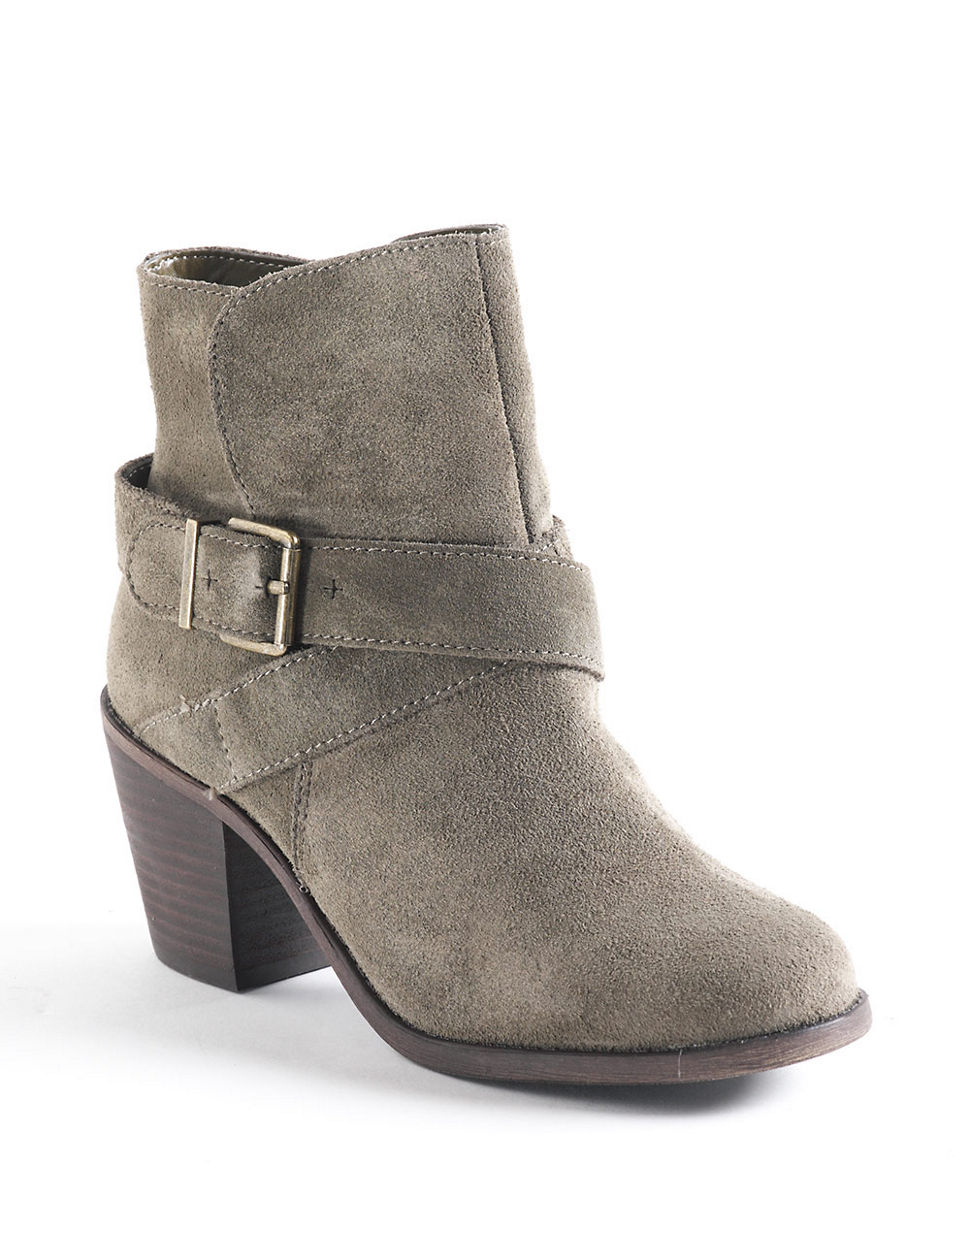 Bcbgeneration Aries Suede Ankle Boots in Green (OLIVE GREEN) | Lyst